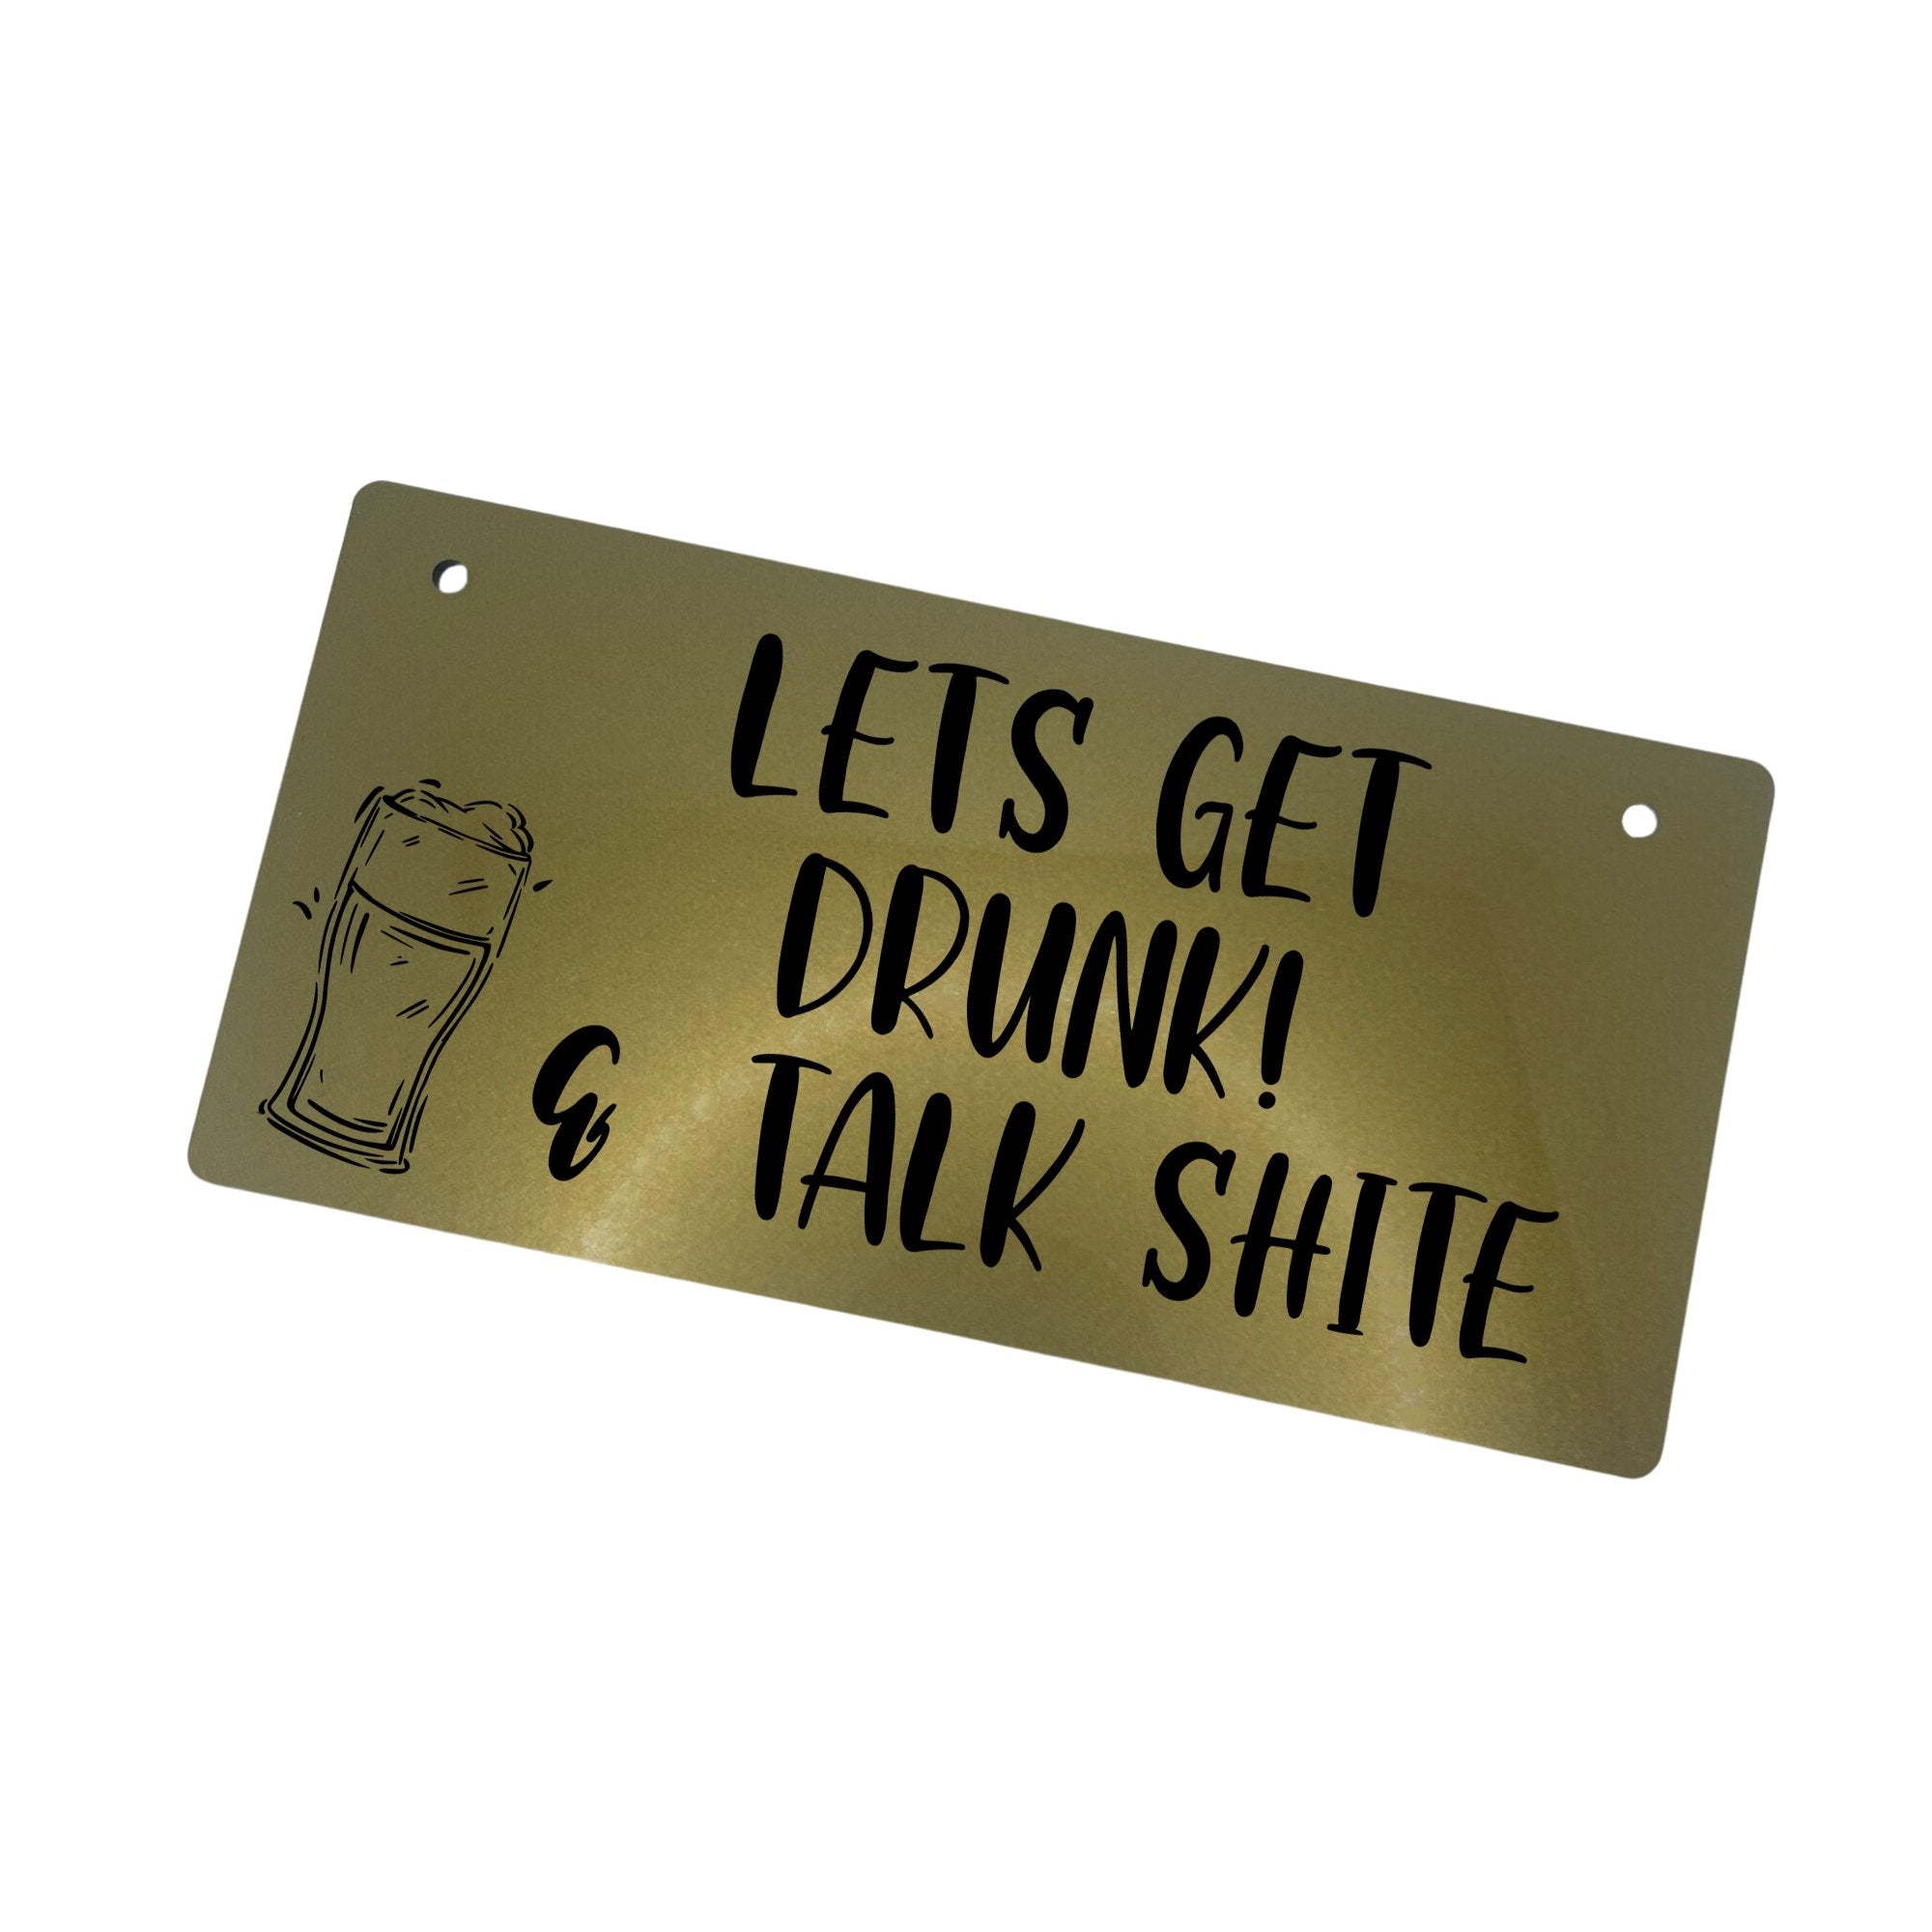 Humorous engraved sign that says 'Let's get drunk & talk shite' on a silver or gold acrylic background. With beer image 